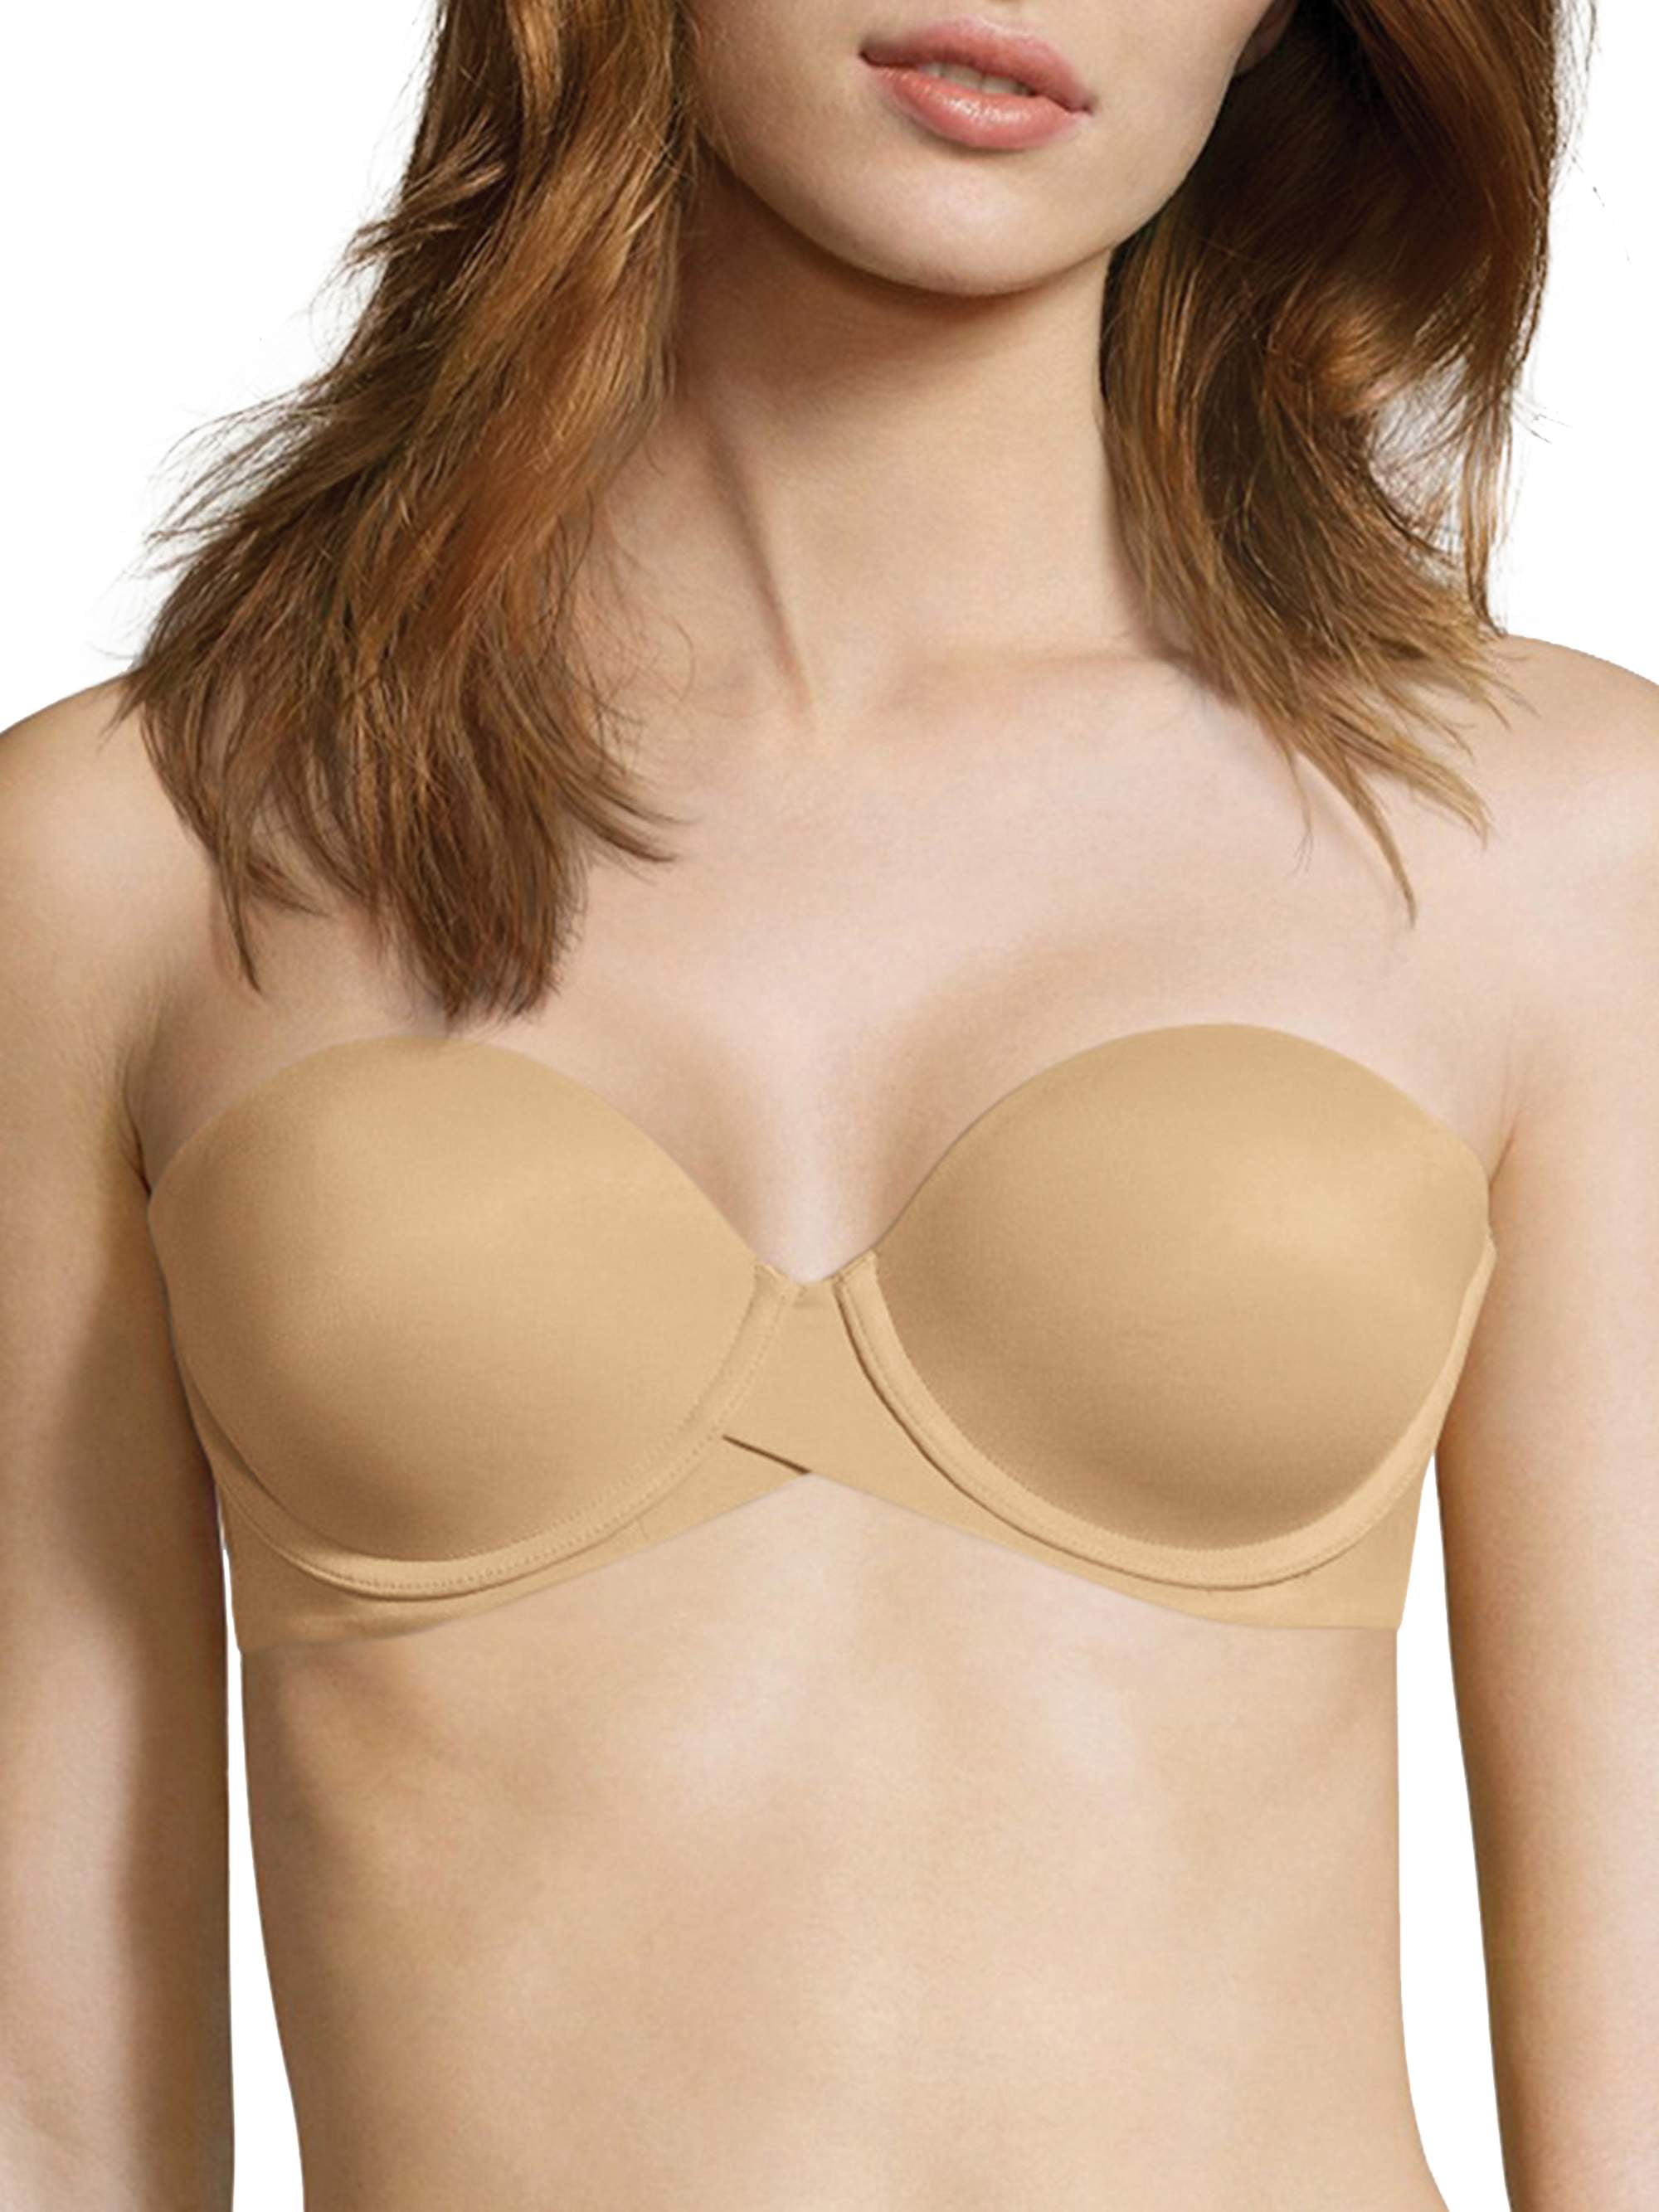 Maidenform - Sweet Nothings Women's Stay Put Strapless Push Up Underwi...